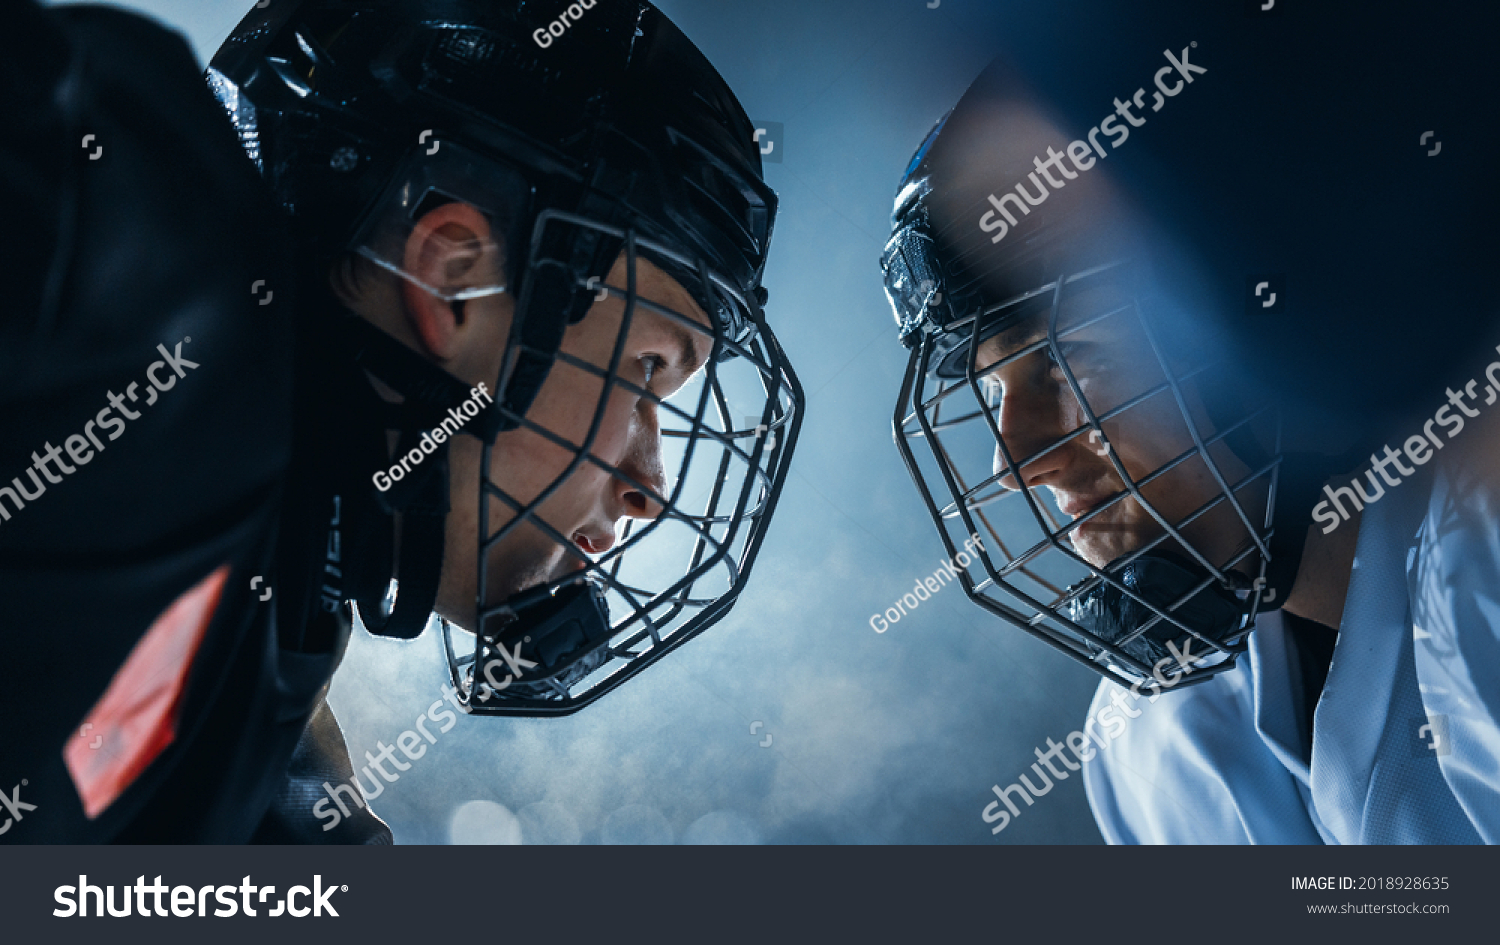 Ice Hockey Rink Arena Game Start: Two Professional Players Aggressive Face off, Sticks Ready. Intense Competitive Game Wide of Brutal Energy, Speed, Power, Professionalism, Skill. Close-up Shot. #2018928635